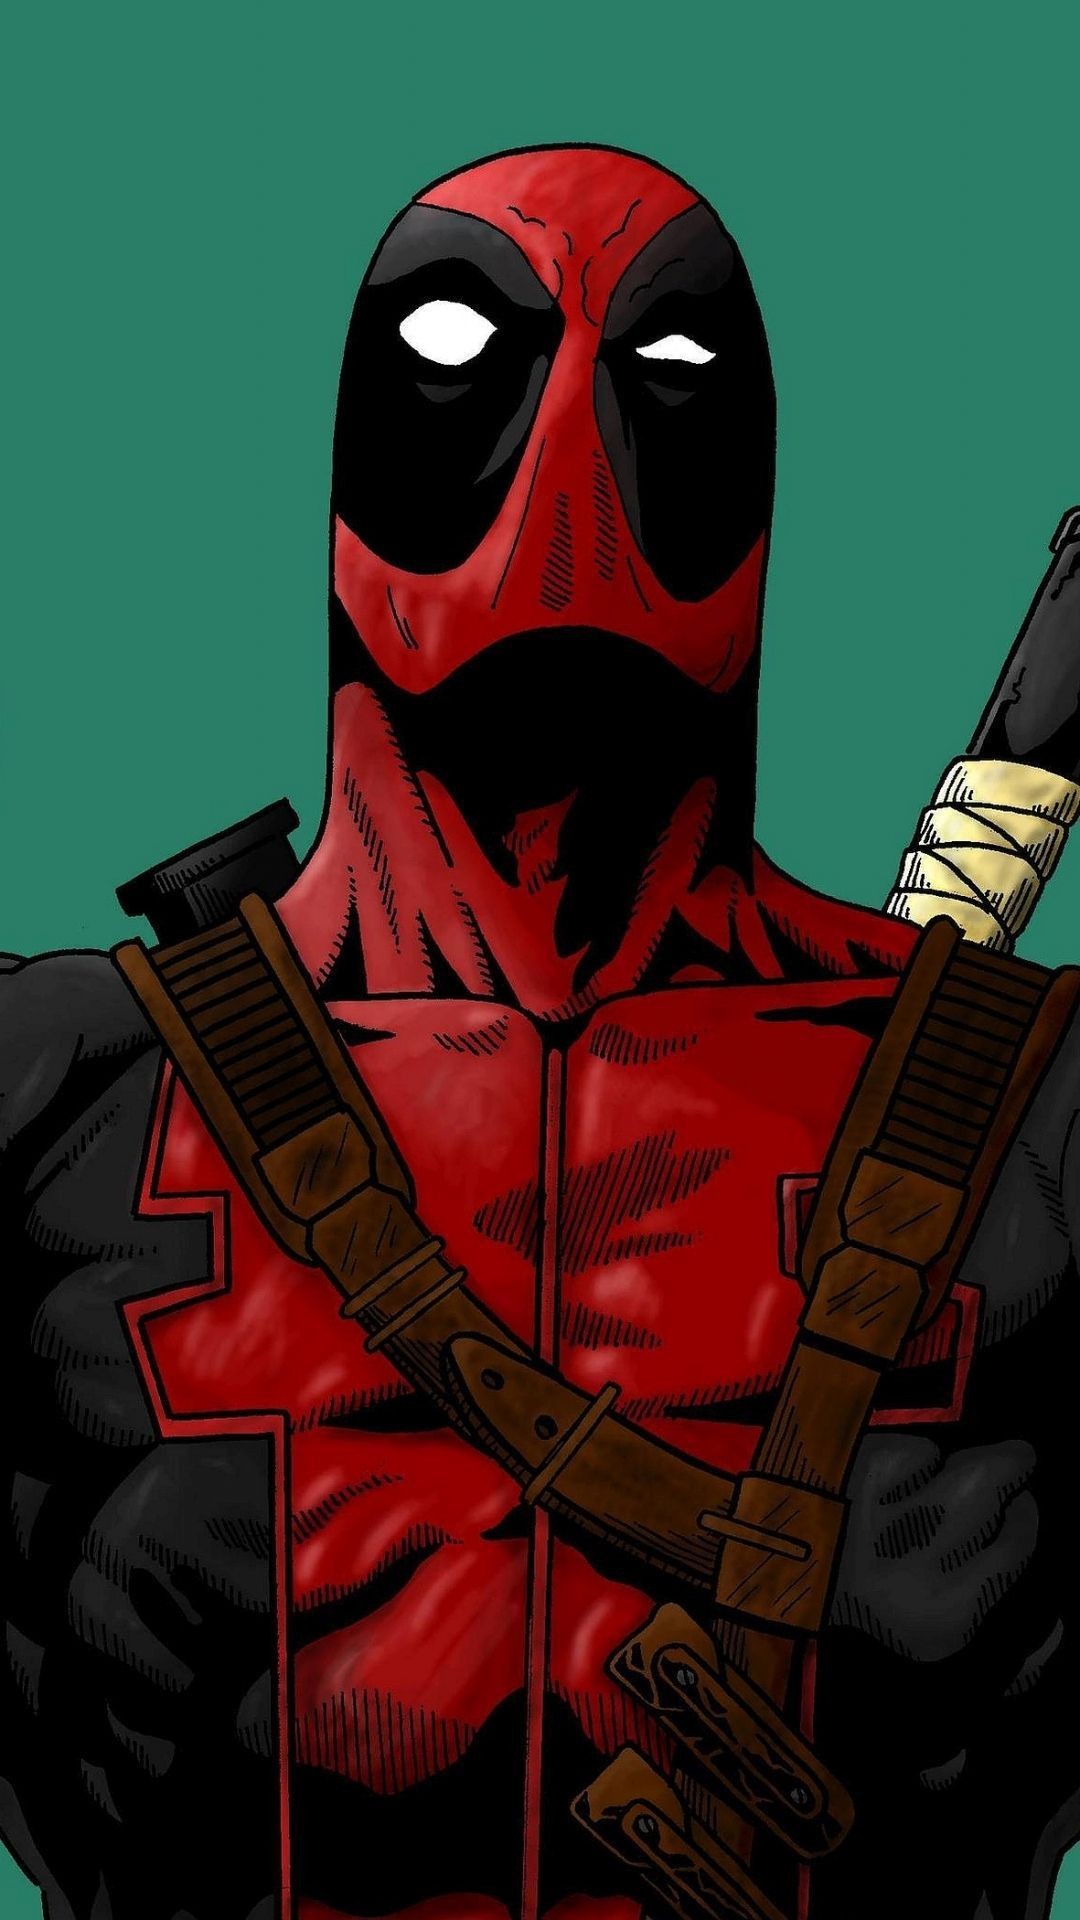 1080x1920 1680x1050 You guys want some Deadpool wallpapers? - Album on Imgur">